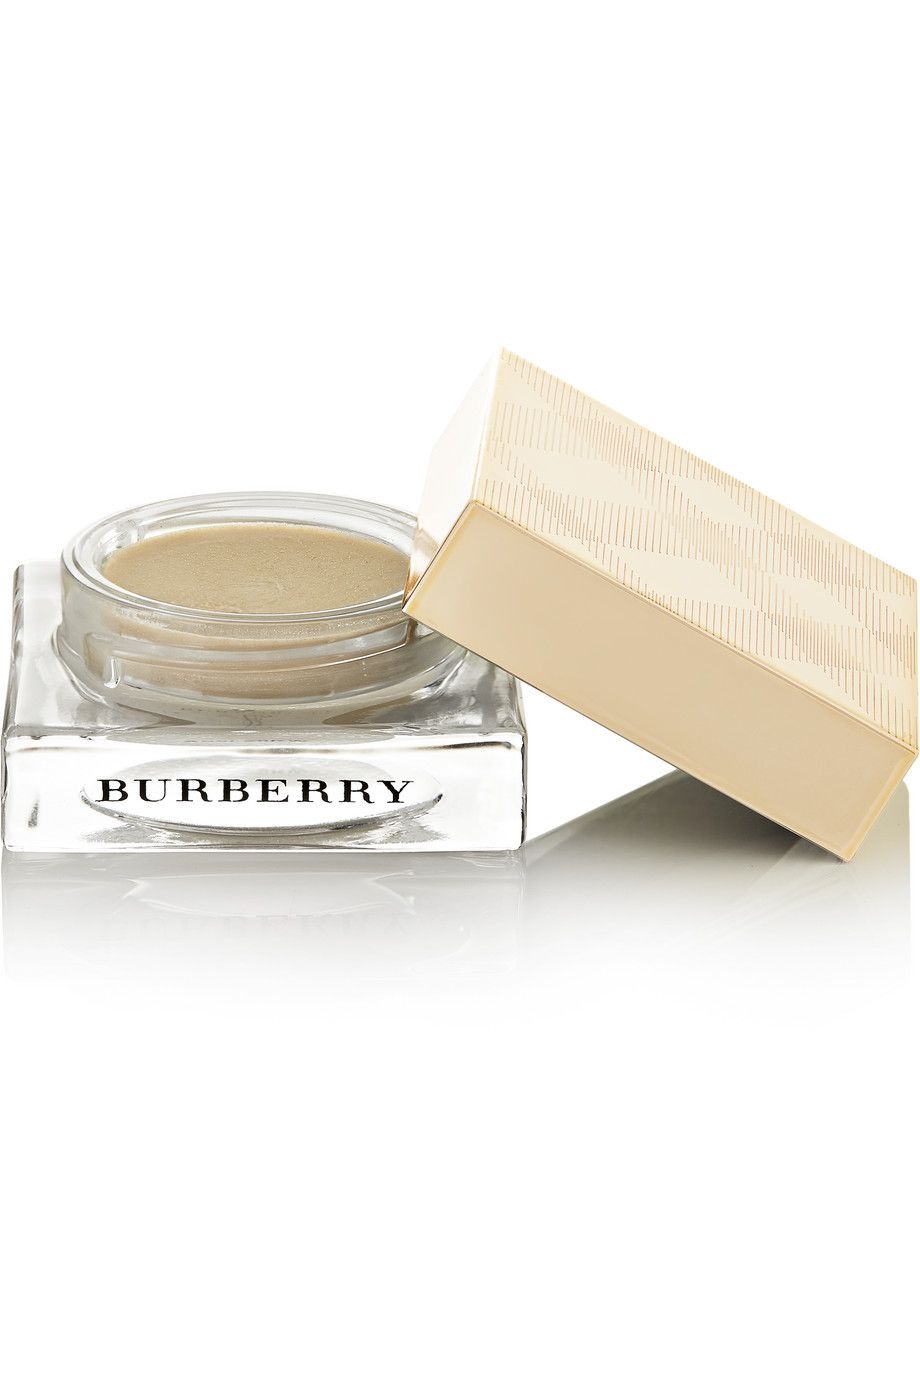 My Burberry Solid Perfume